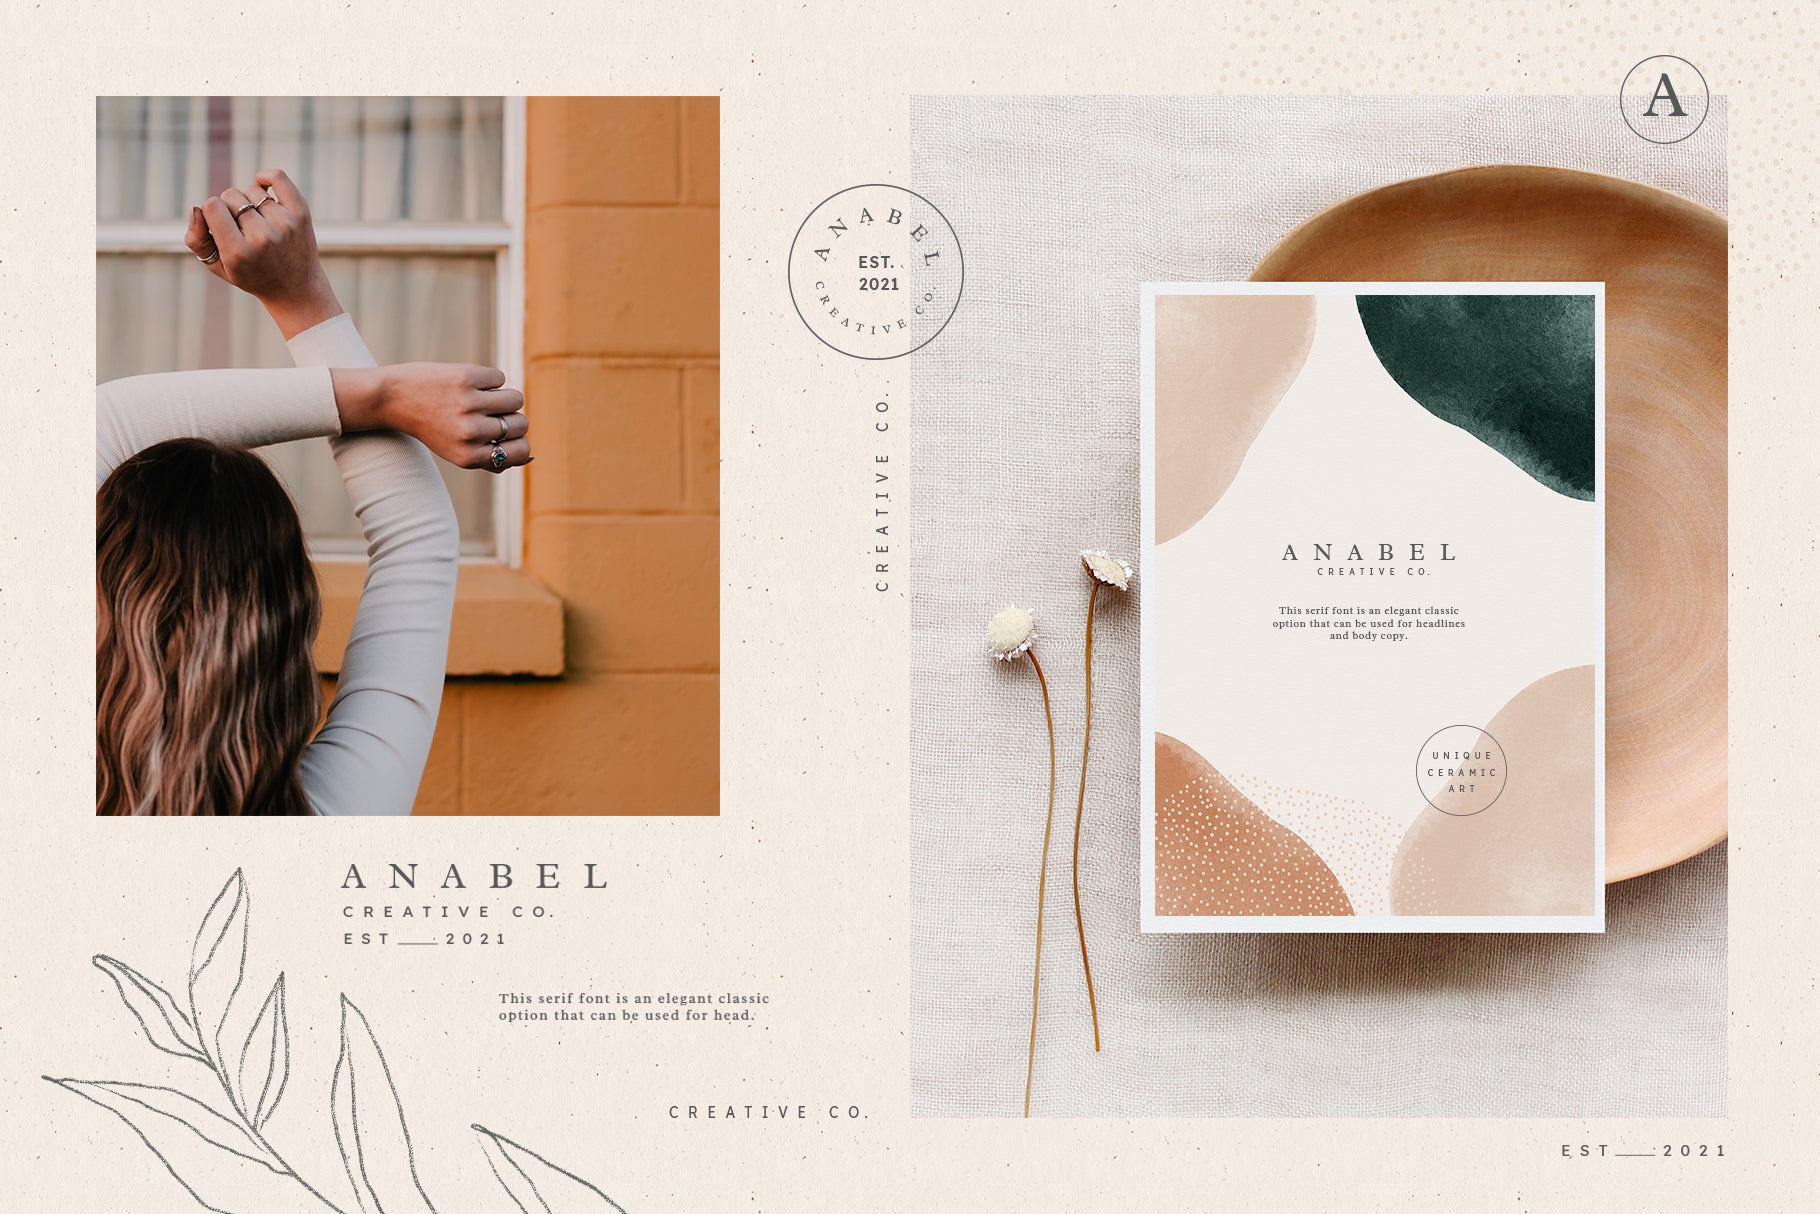 graphic design assets for an artistic brand featuring painted watercolor shapes